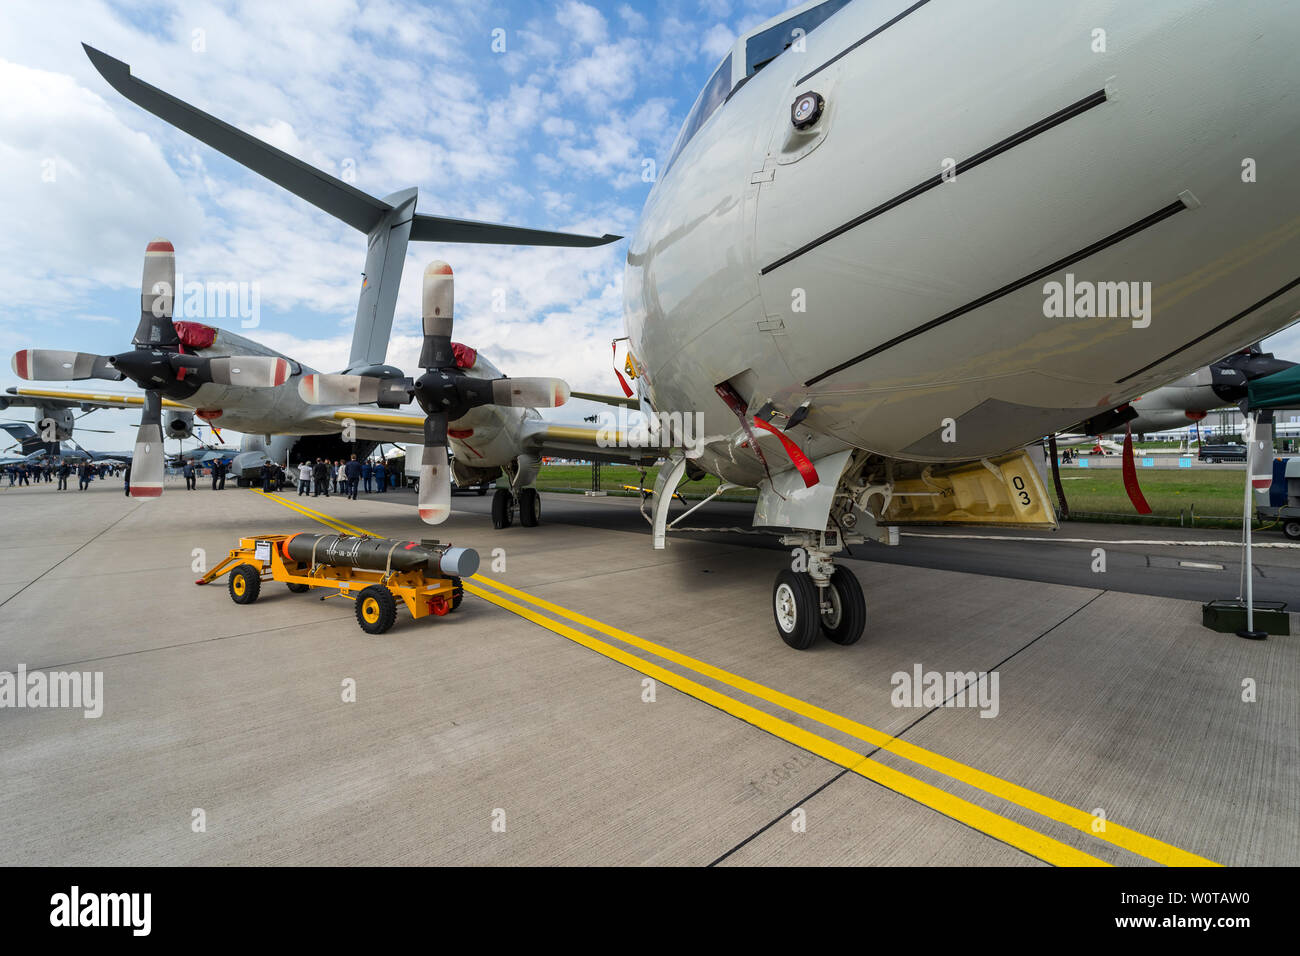 BERLIN, GERMANY - APRIL 25, 2018: Maritime patrol aircraft Lockheed P-3C Orion and lightweight antisubmarine torpedo Mark 46, Mod 5 in the foreground. German Navy. Exhibition ILA Berlin Air Show 2018. Stock Photo